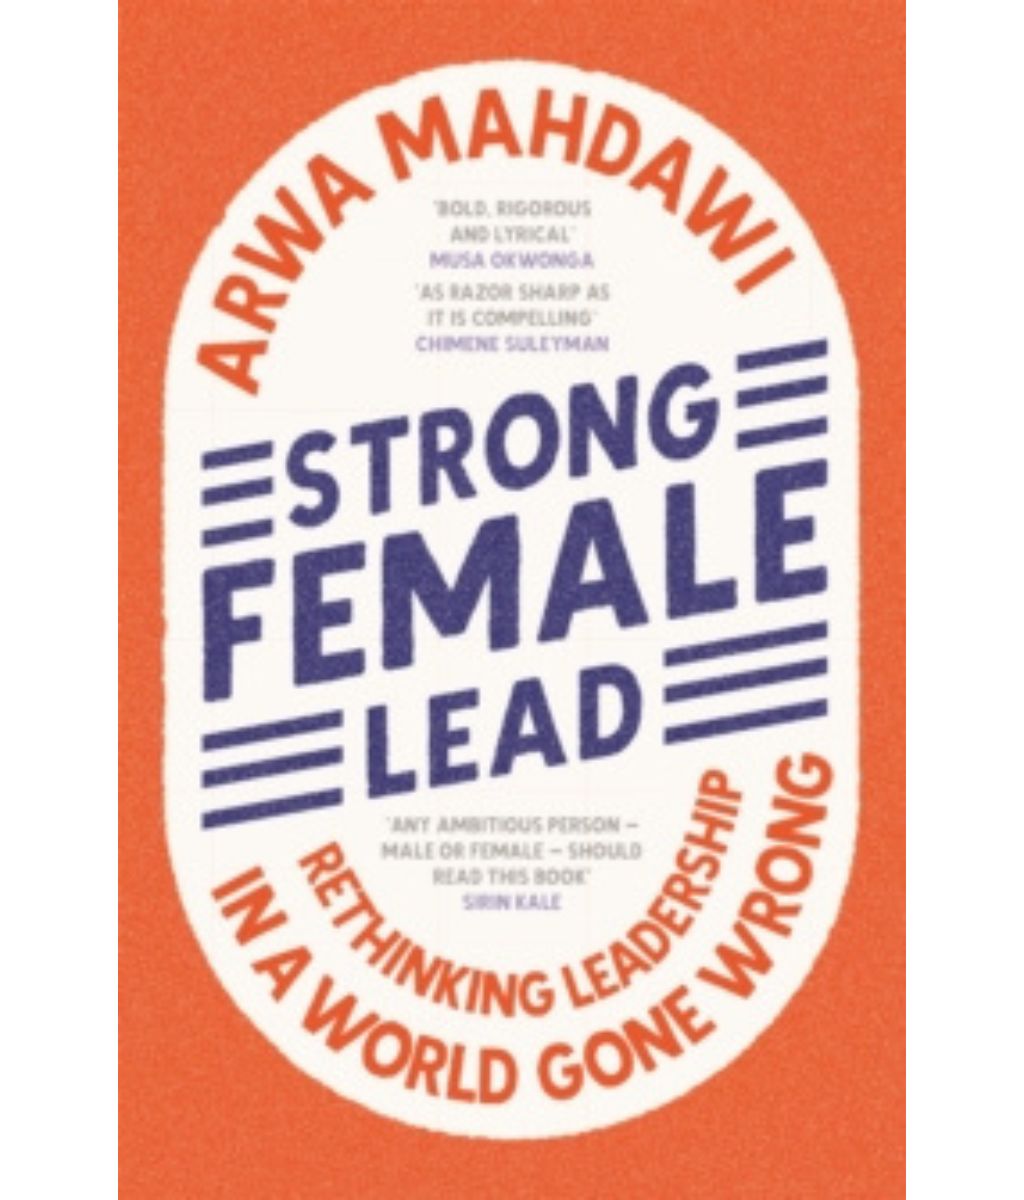 Strong Female Lead : Rethinking Leadership in a World Gone Wrong